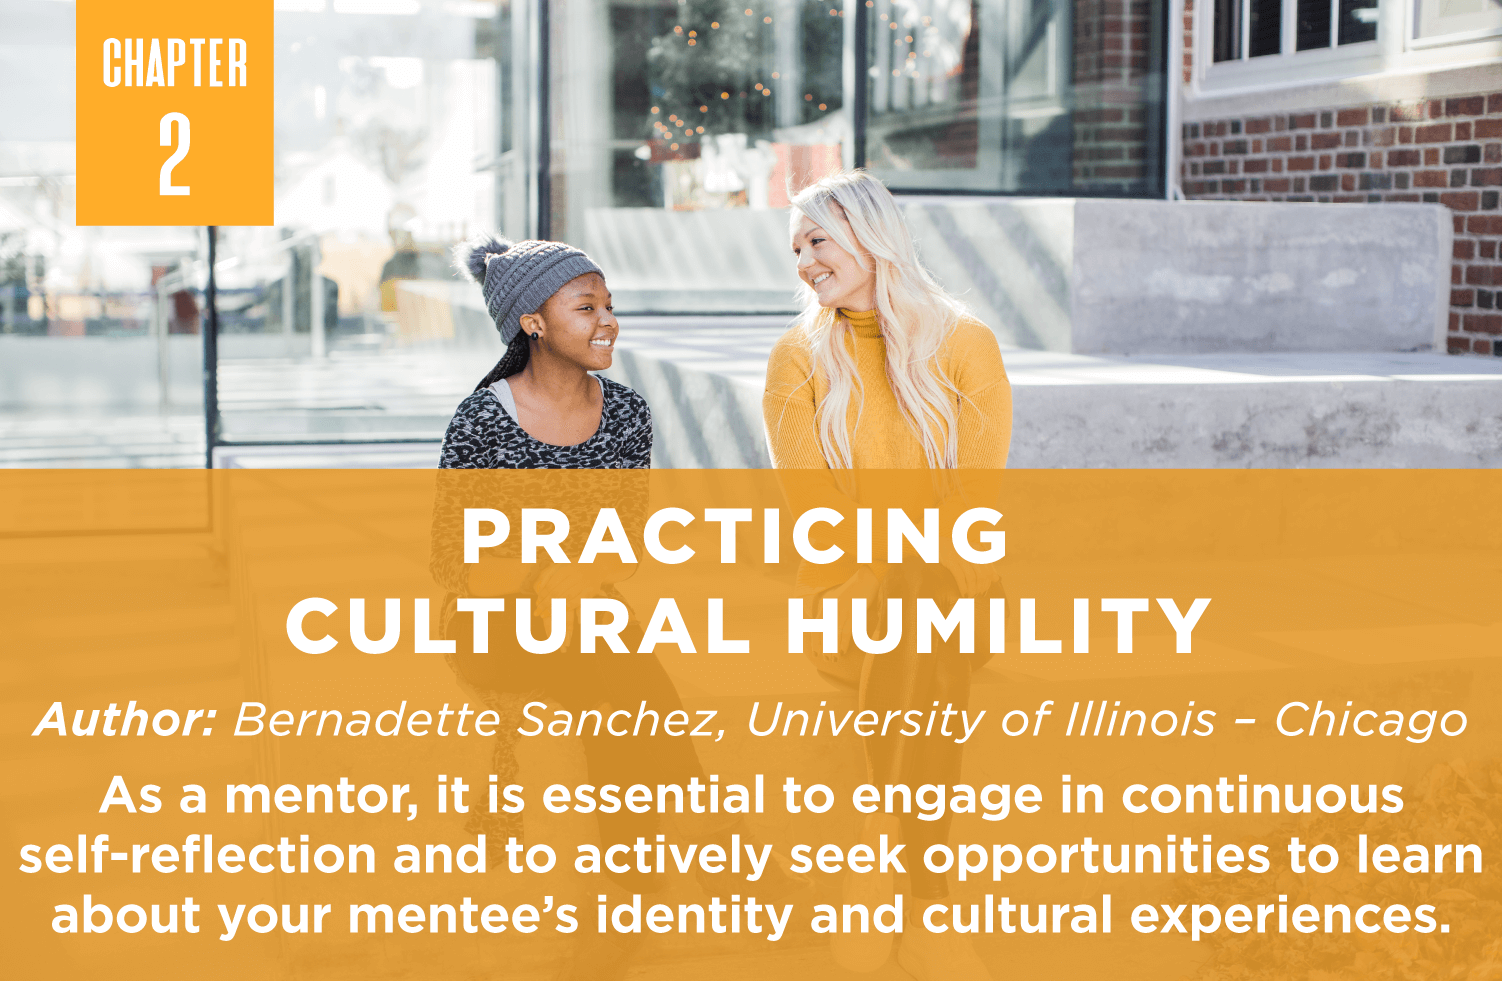 Practicing 
Cultural Humility
Author: Bernadette Sanchez, University of Illinois – Chicago
As a mentor, it is essential to engage in continuous self-reflection and to actively seek opportunities to learn about your mentee’s identity and cultural experiences.